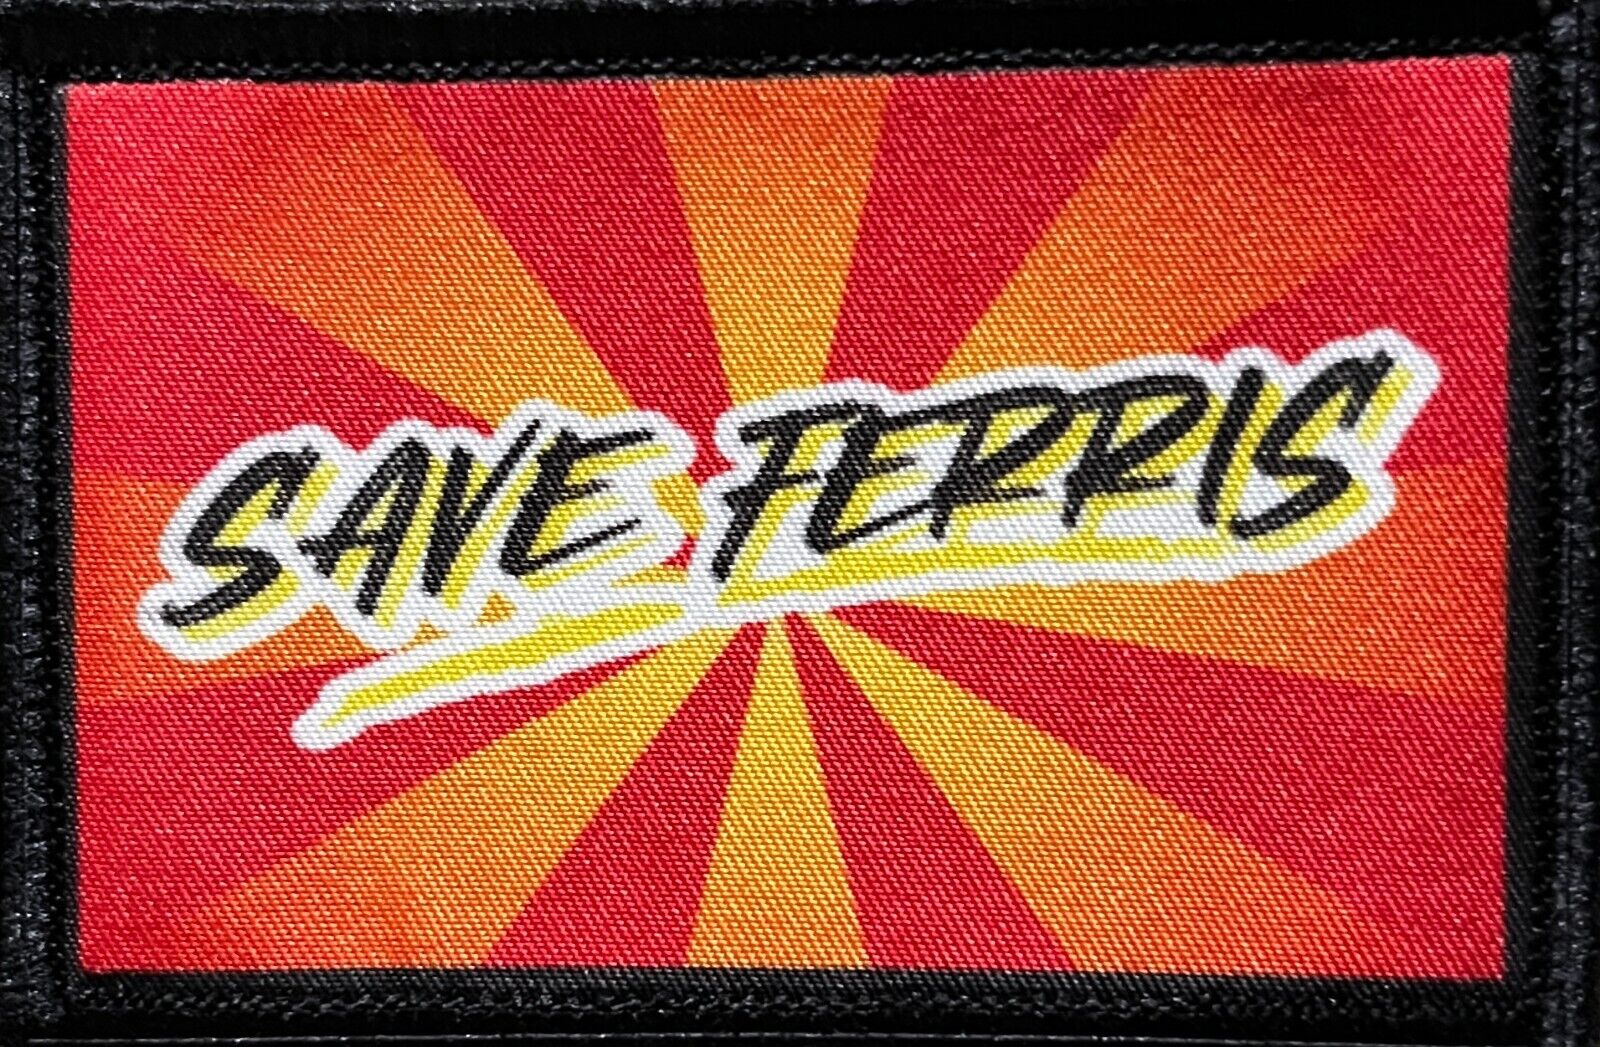 Save Ferris Morale Patch Military Tactical Bible